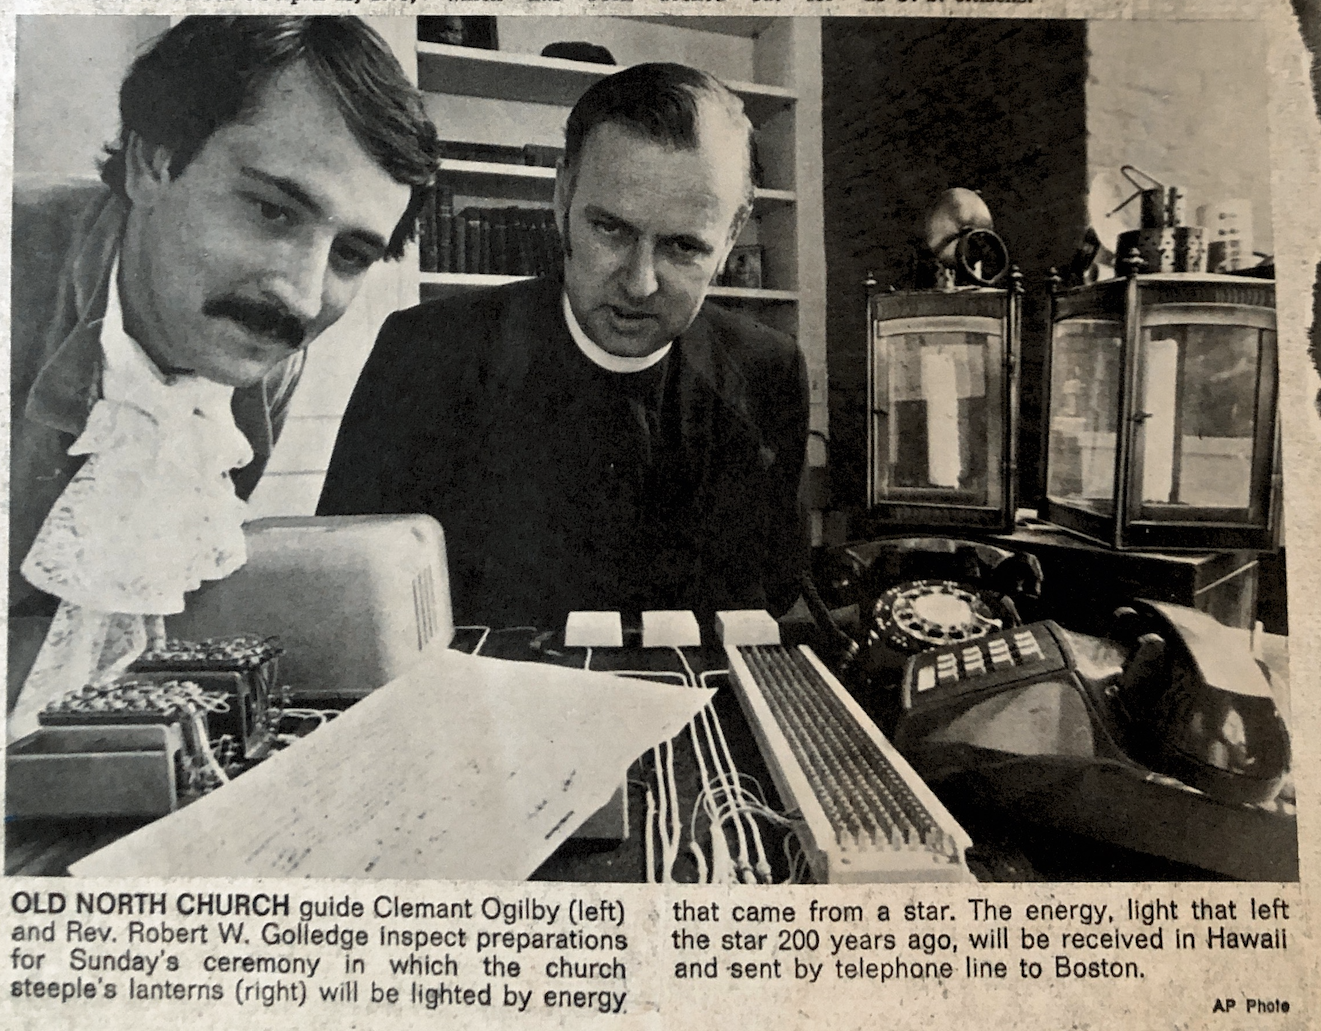 Clemant Ogilby and Rev. Robert Golledge in 1975